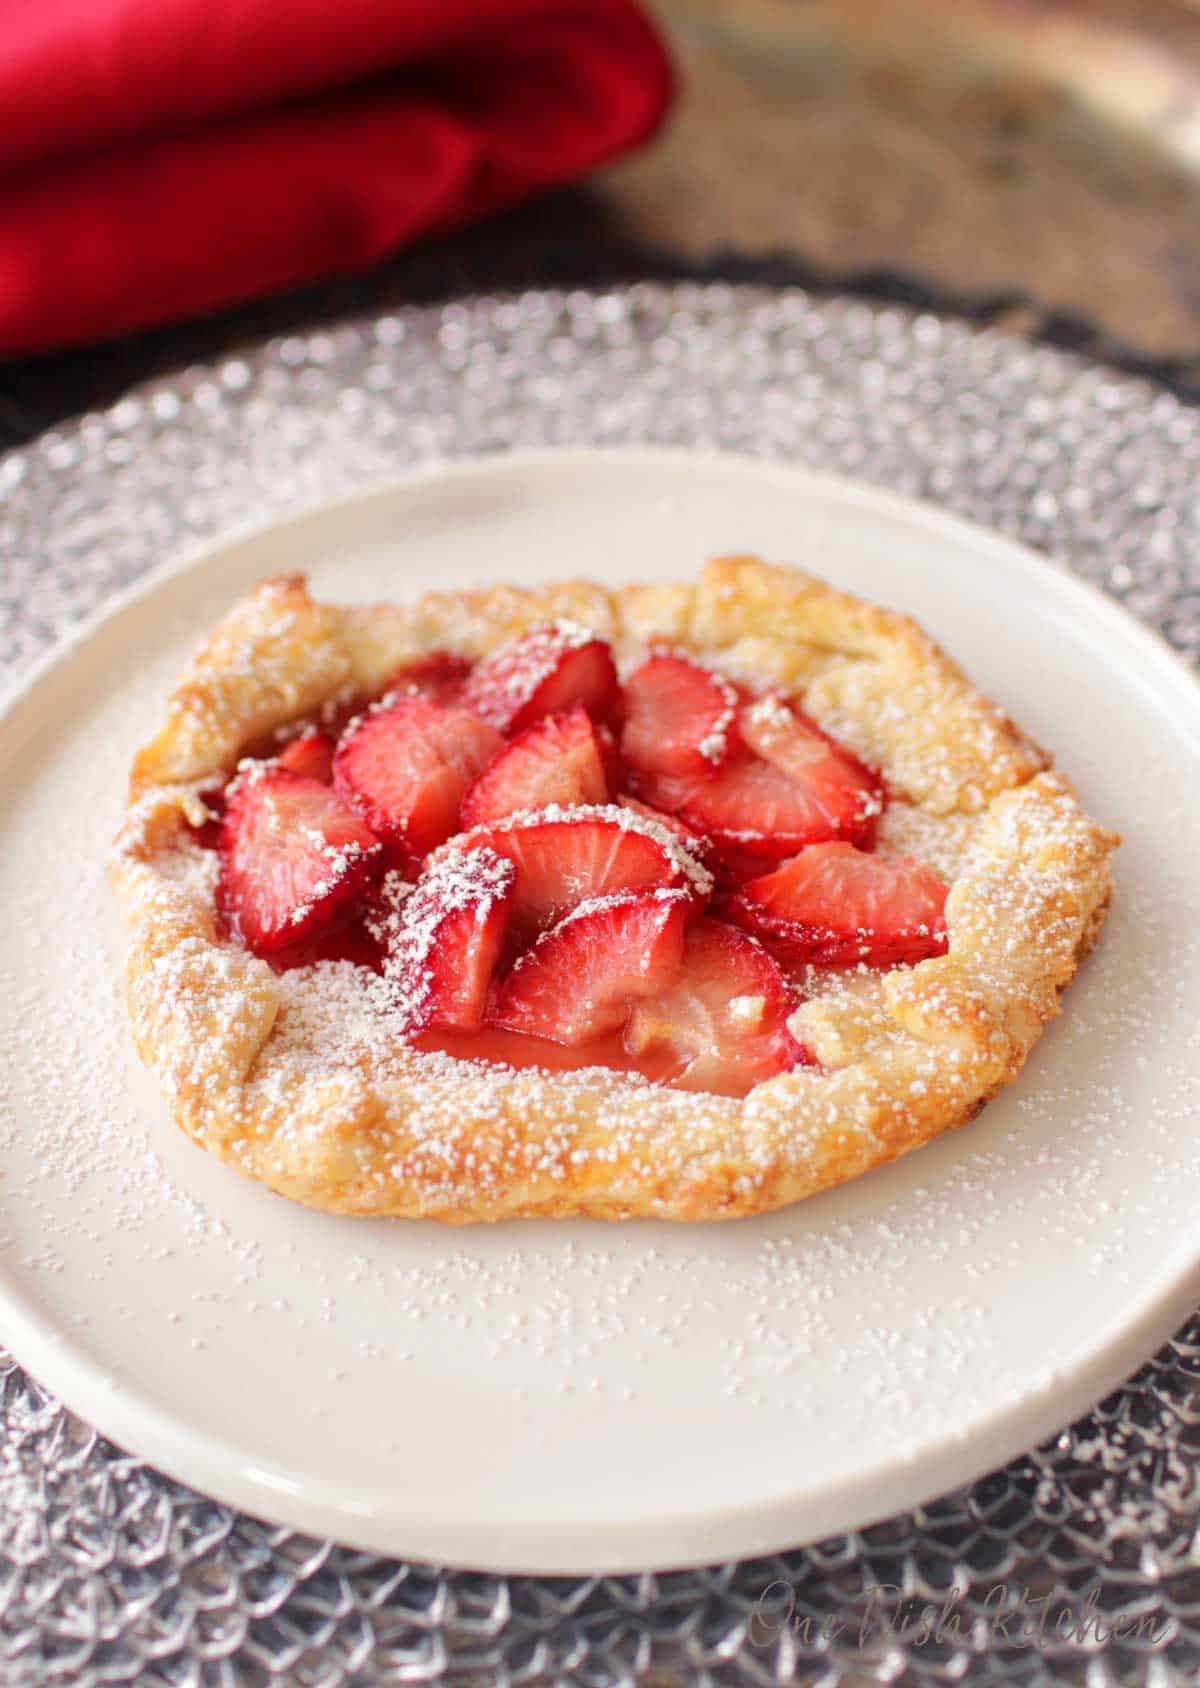 Pie crust with fresh sliced strawberries and dusted with powdered sugar on a plate.